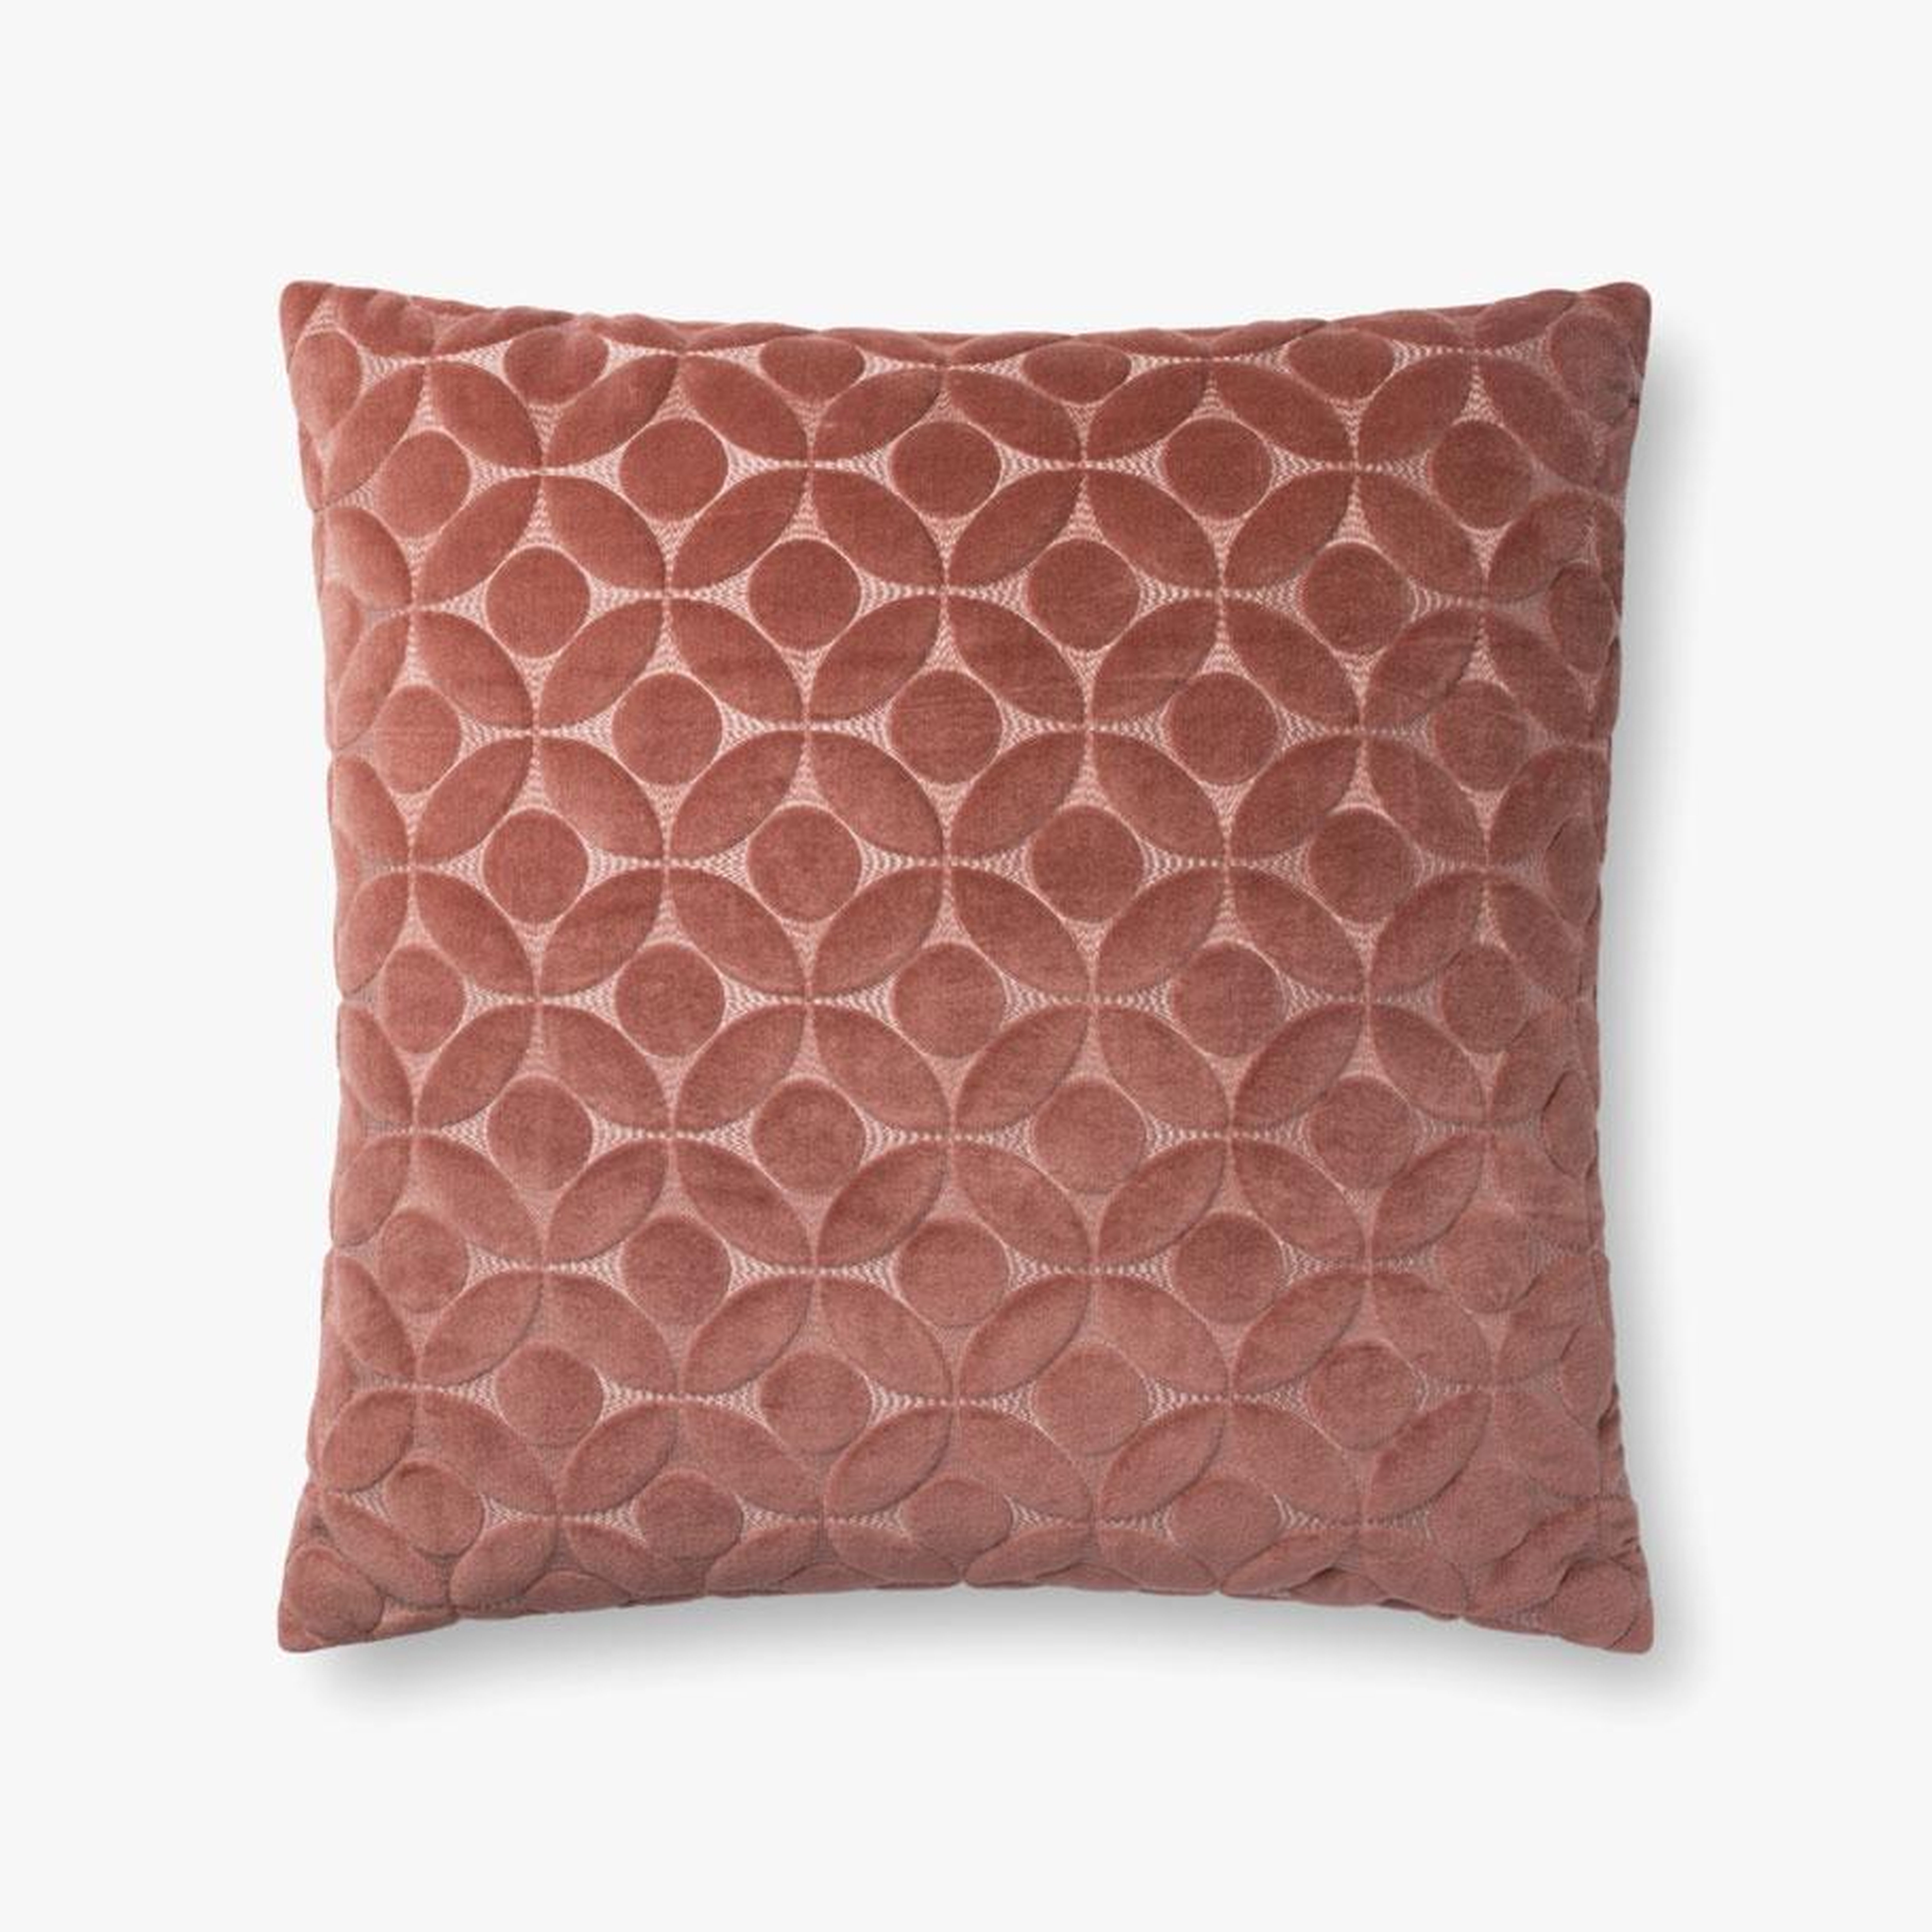 Loloi PILLOWS P0864 Rose 22" x 22" Cover w/Poly - Loloi Rugs